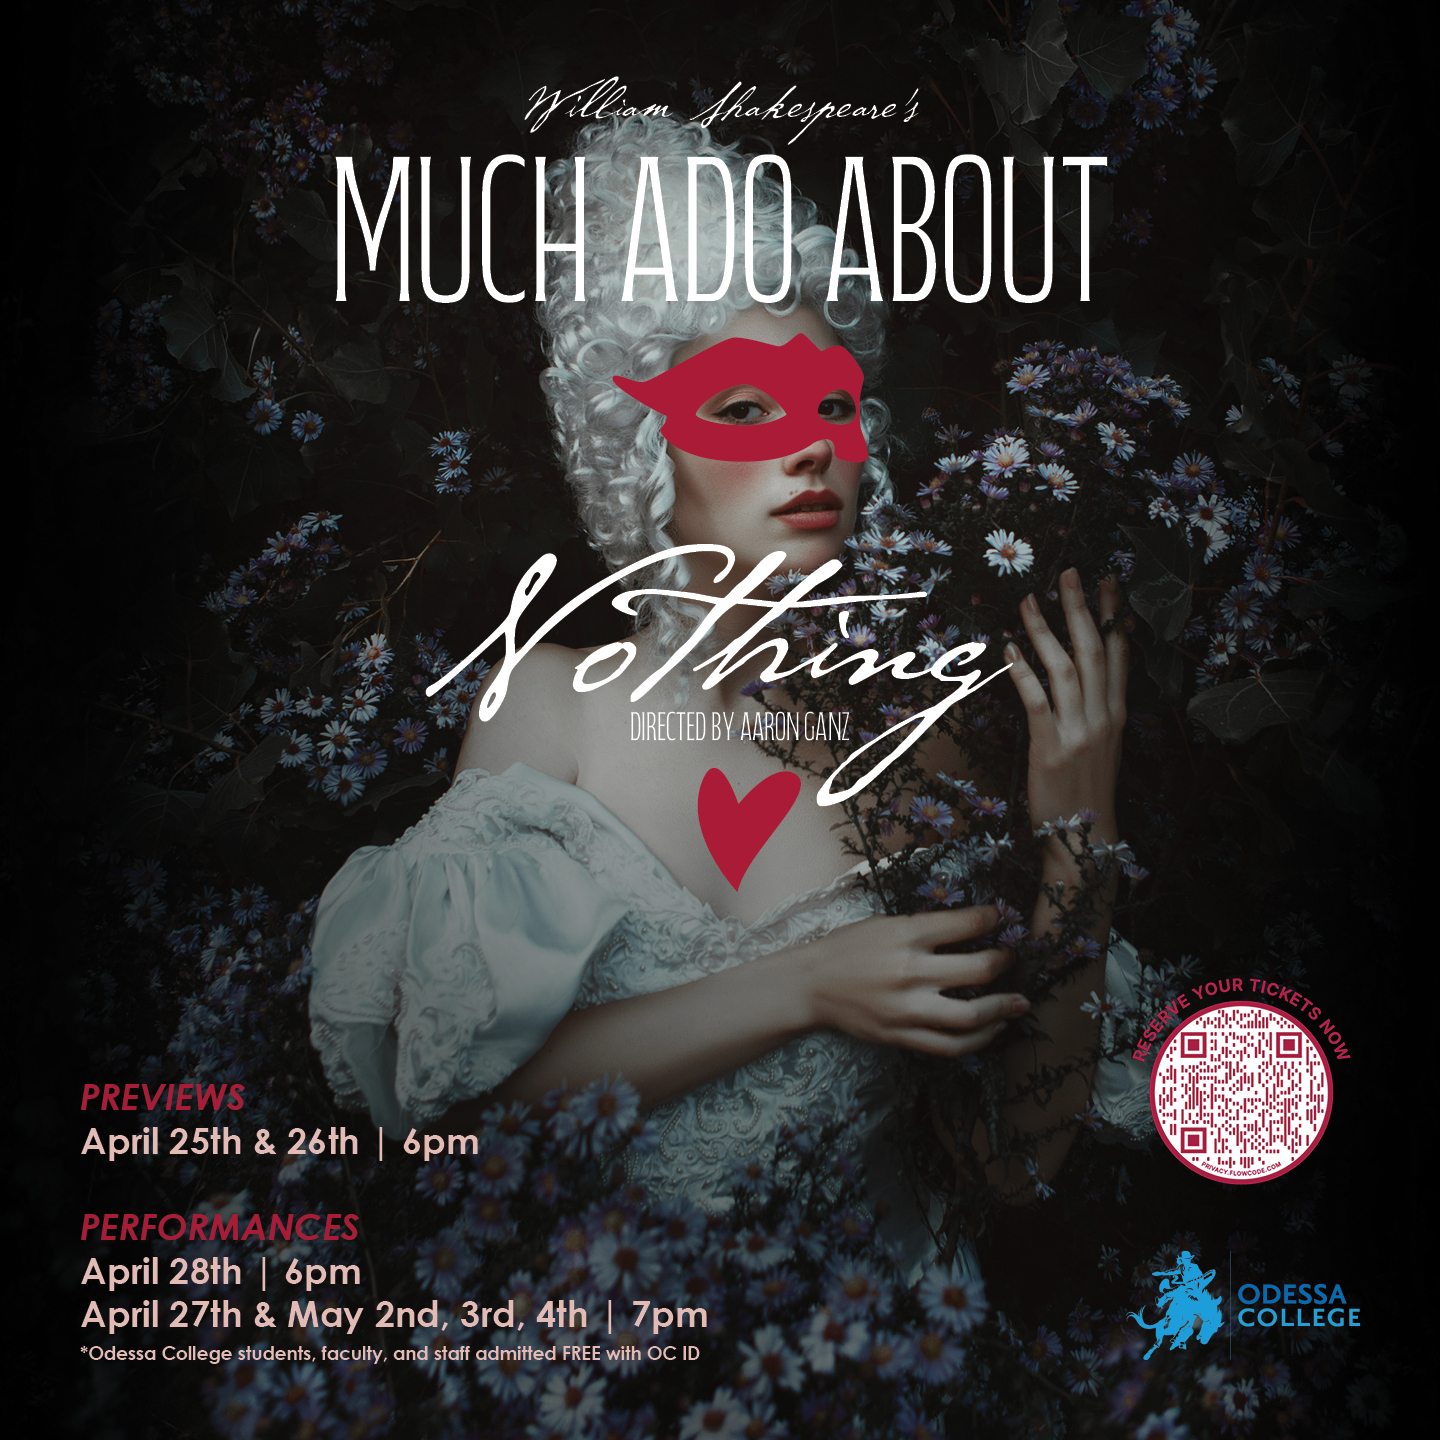 TICKET SALES OPEN FOR "MUCH ADO ABOUT NOTHING"